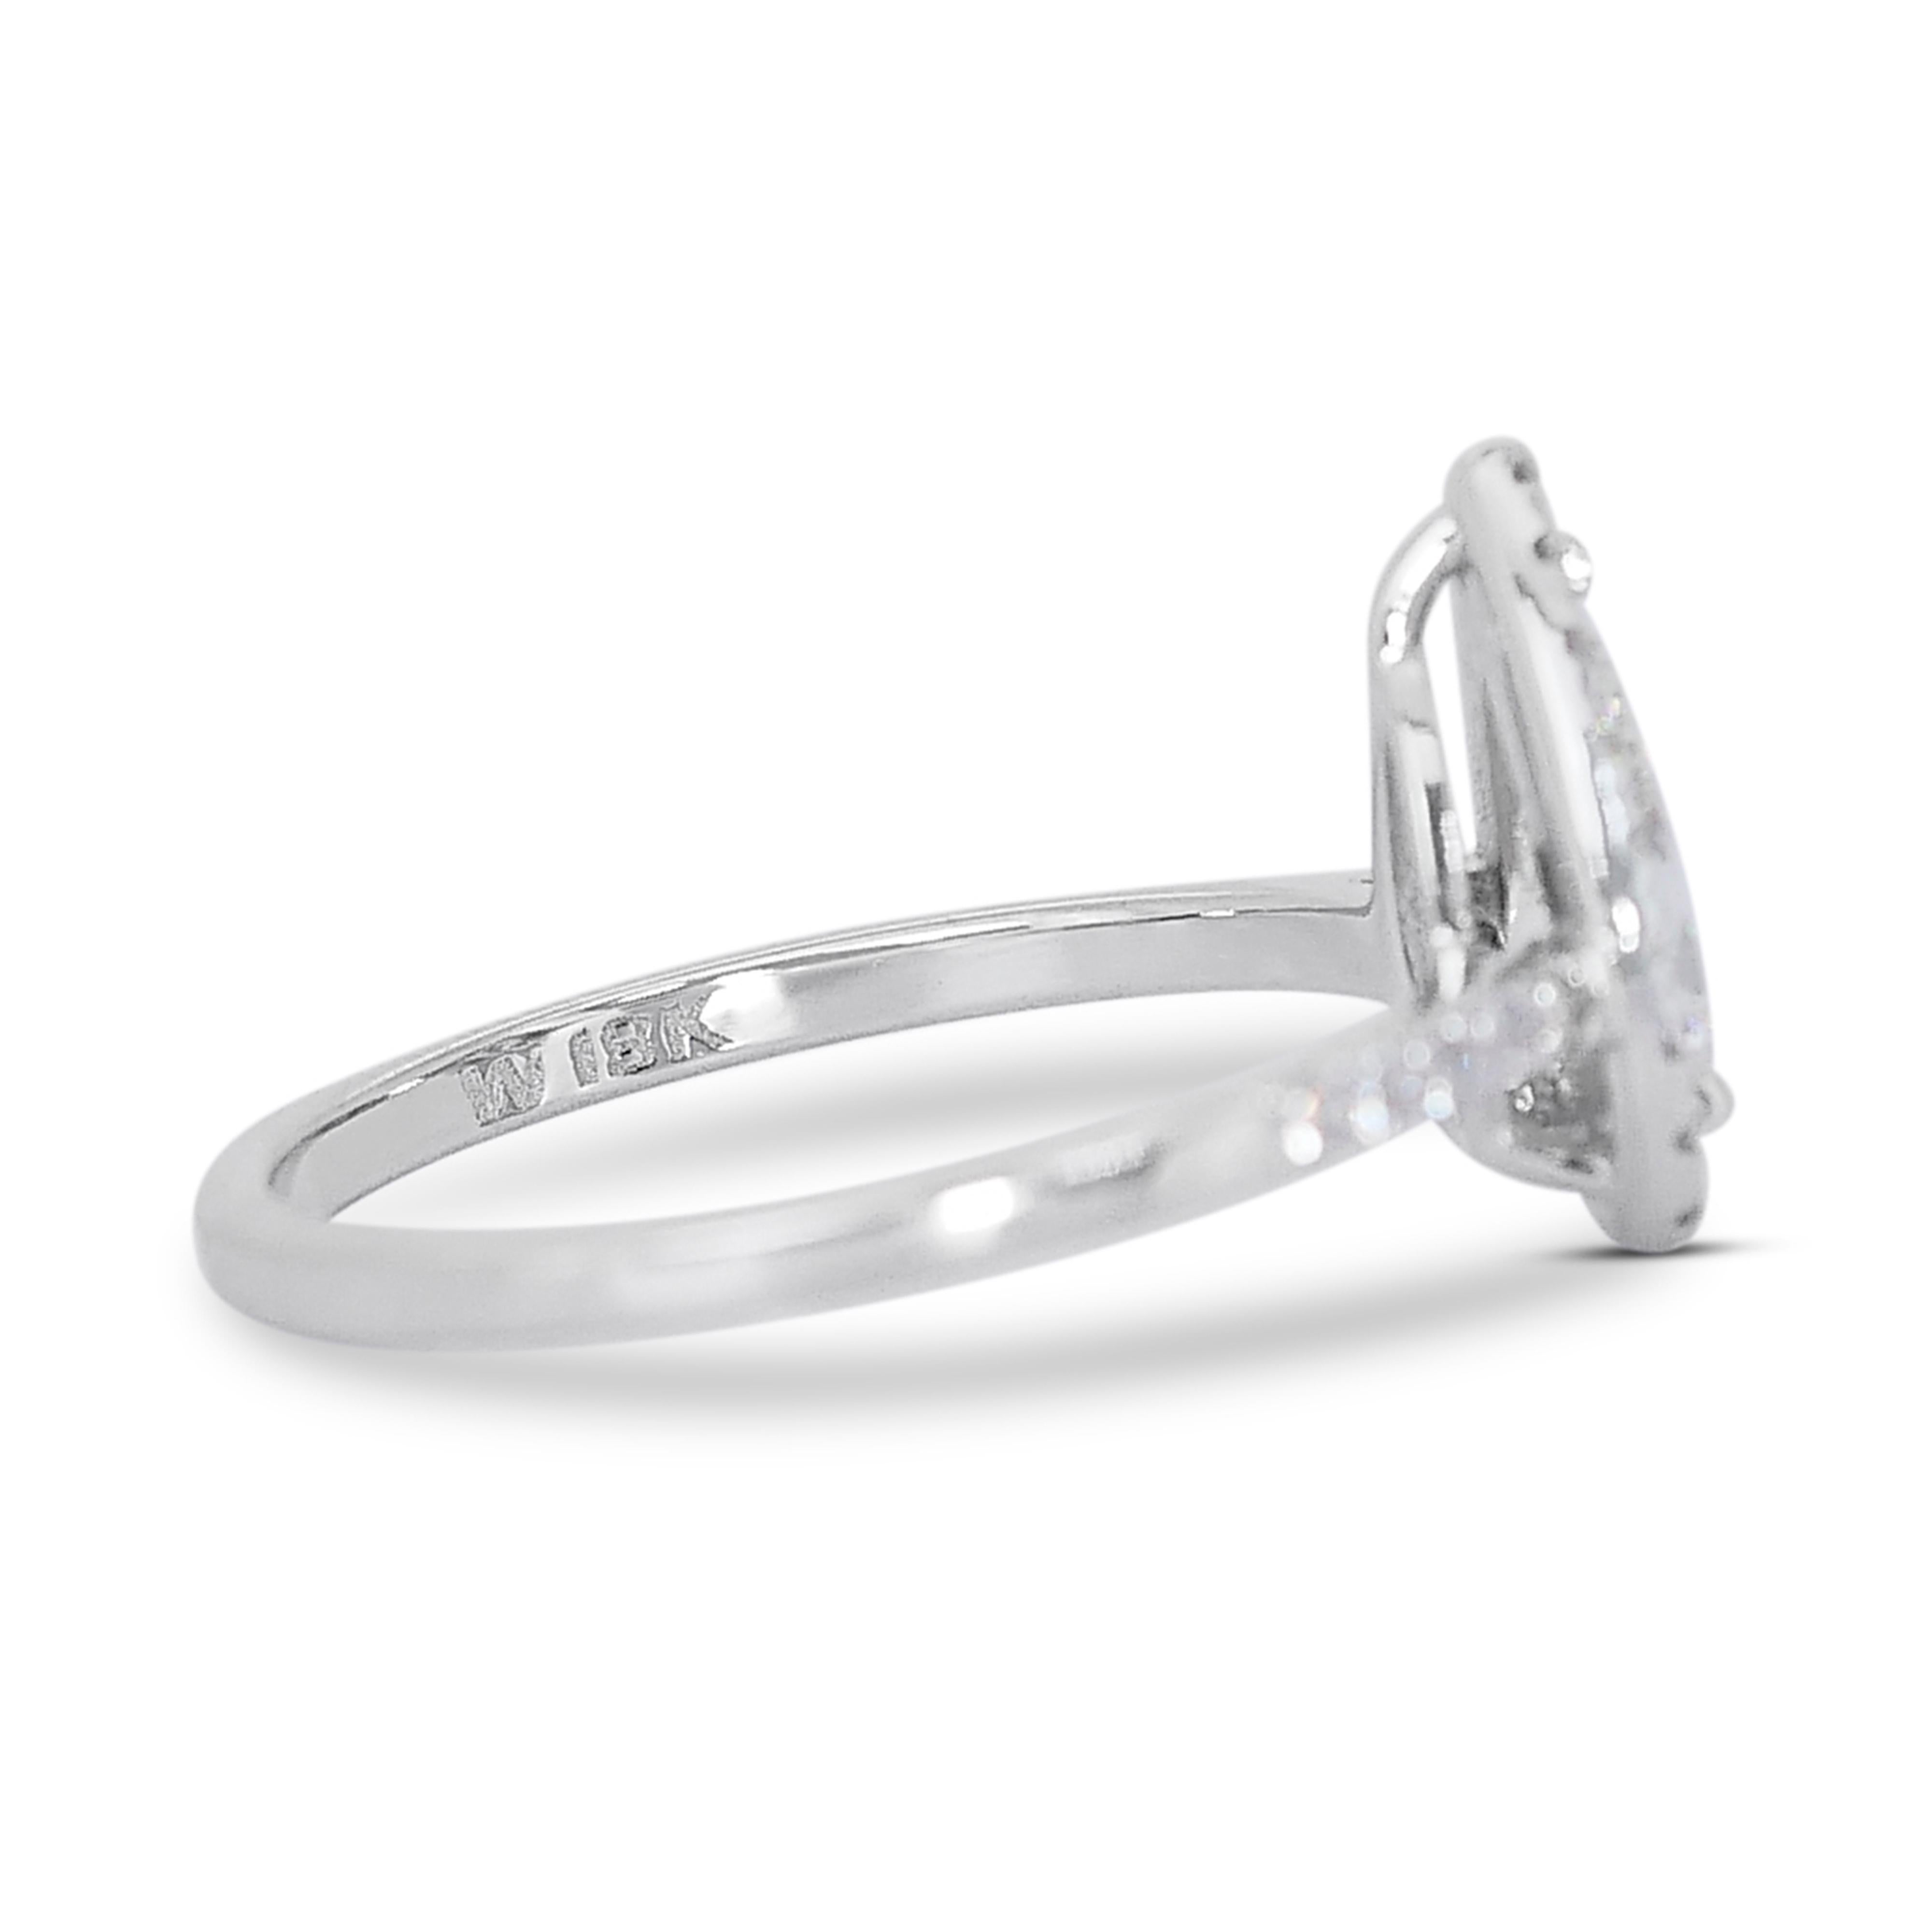 Stunning 1.97ct Pear-Shaped Diamond Halo Ring in 18k White Gold - GIA Certified In New Condition For Sale In רמת גן, IL